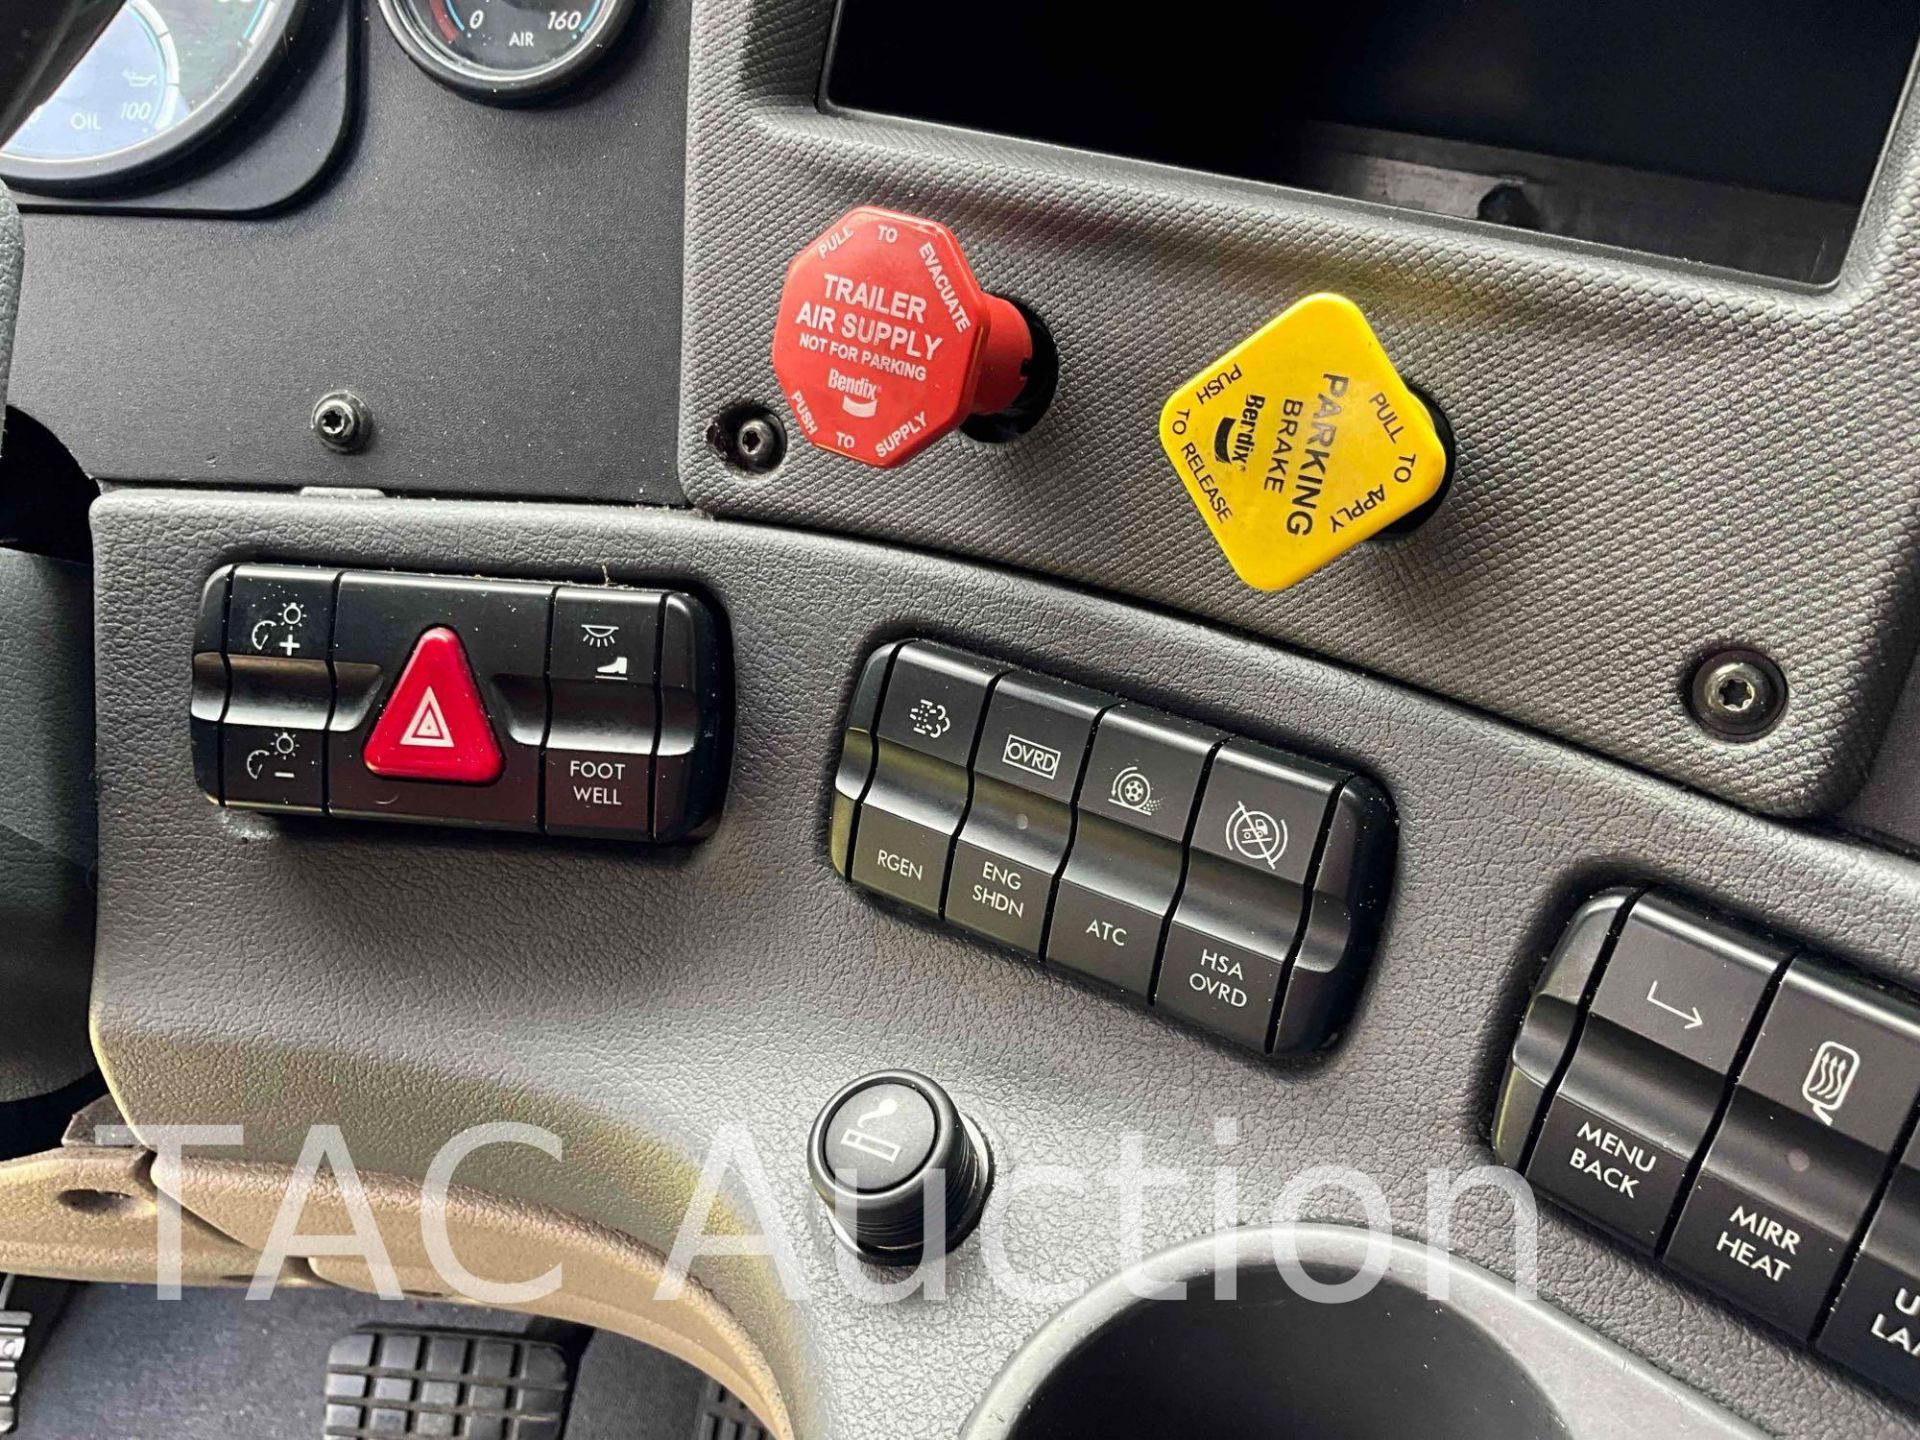 2016 Freightliner Cascadia Day Cab - Image 22 of 78